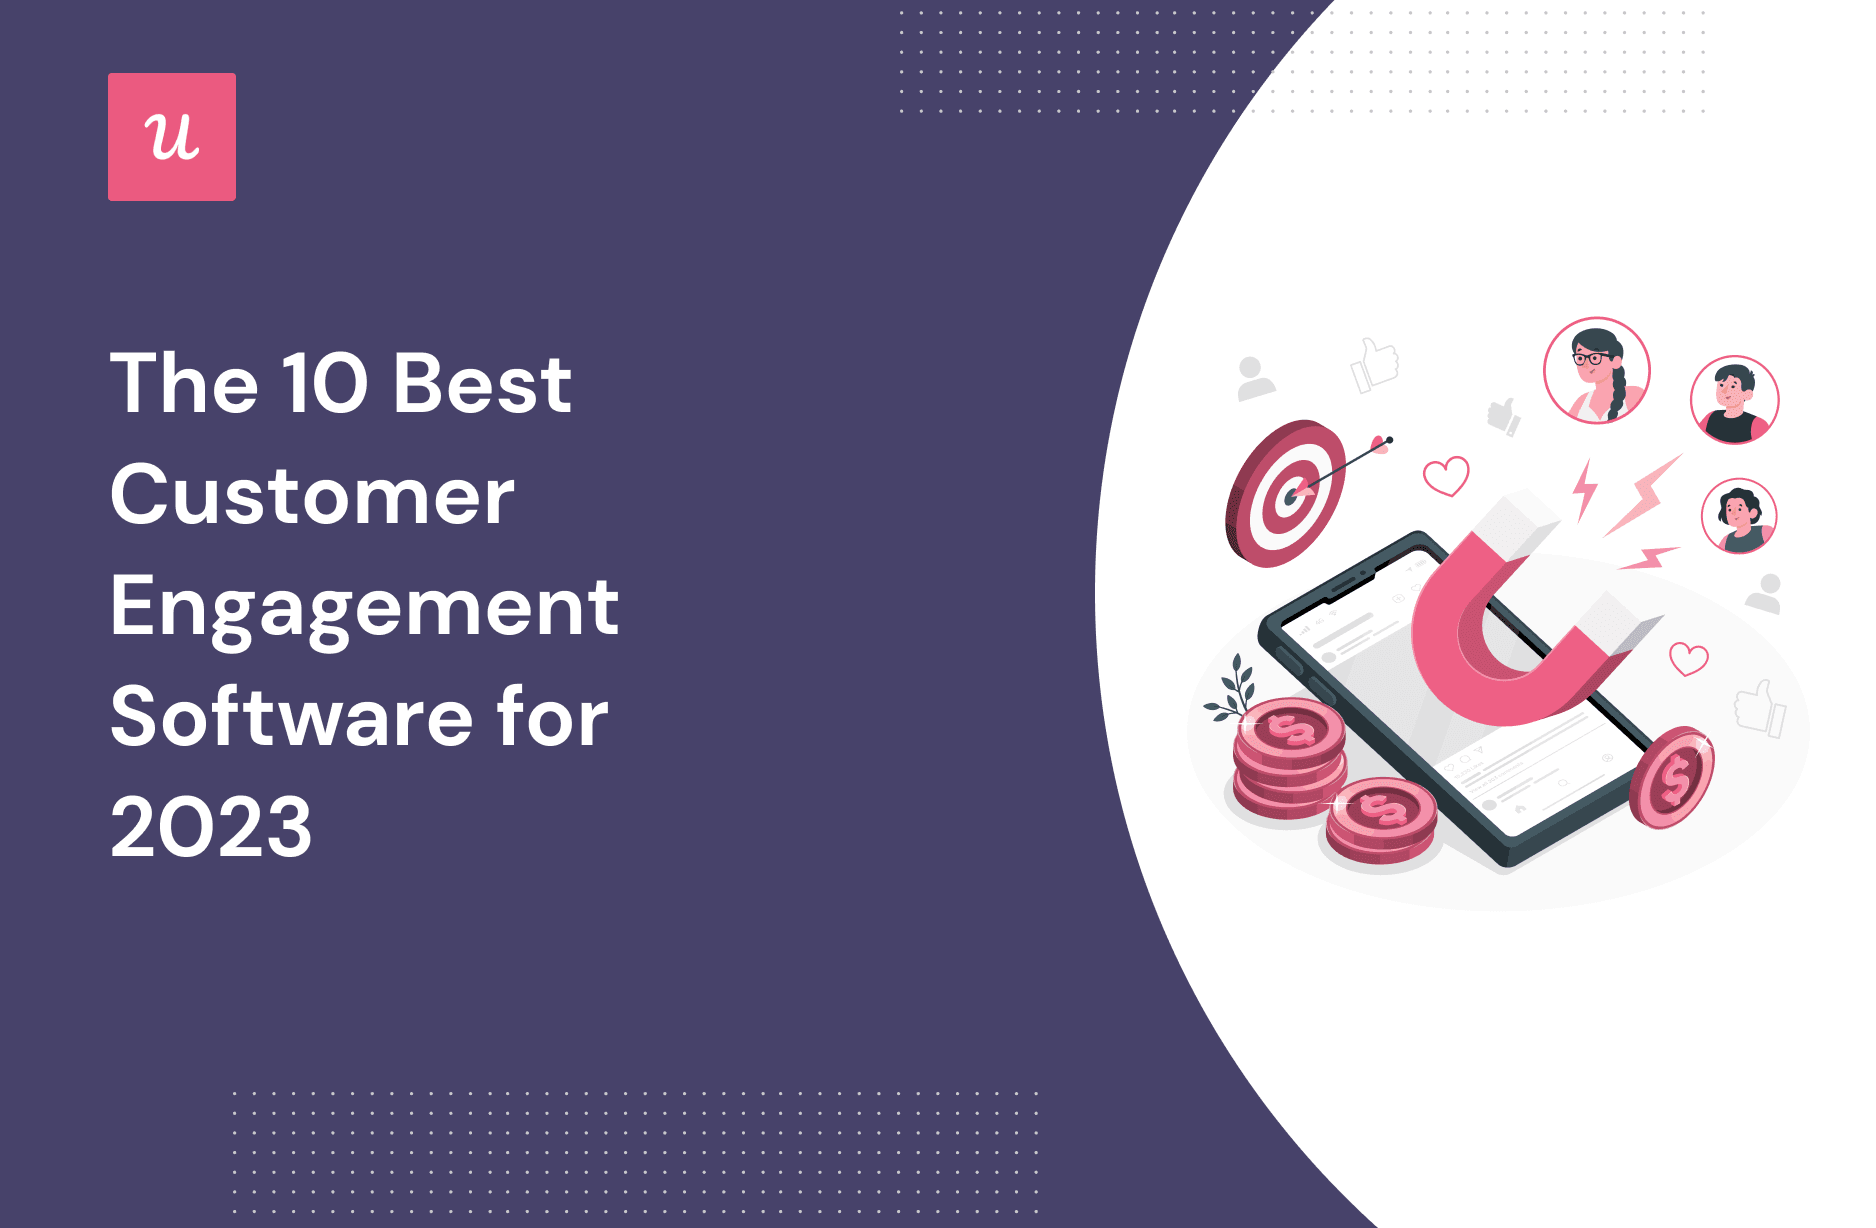 The 10 Best Customer Engagement Software for 2023 cover